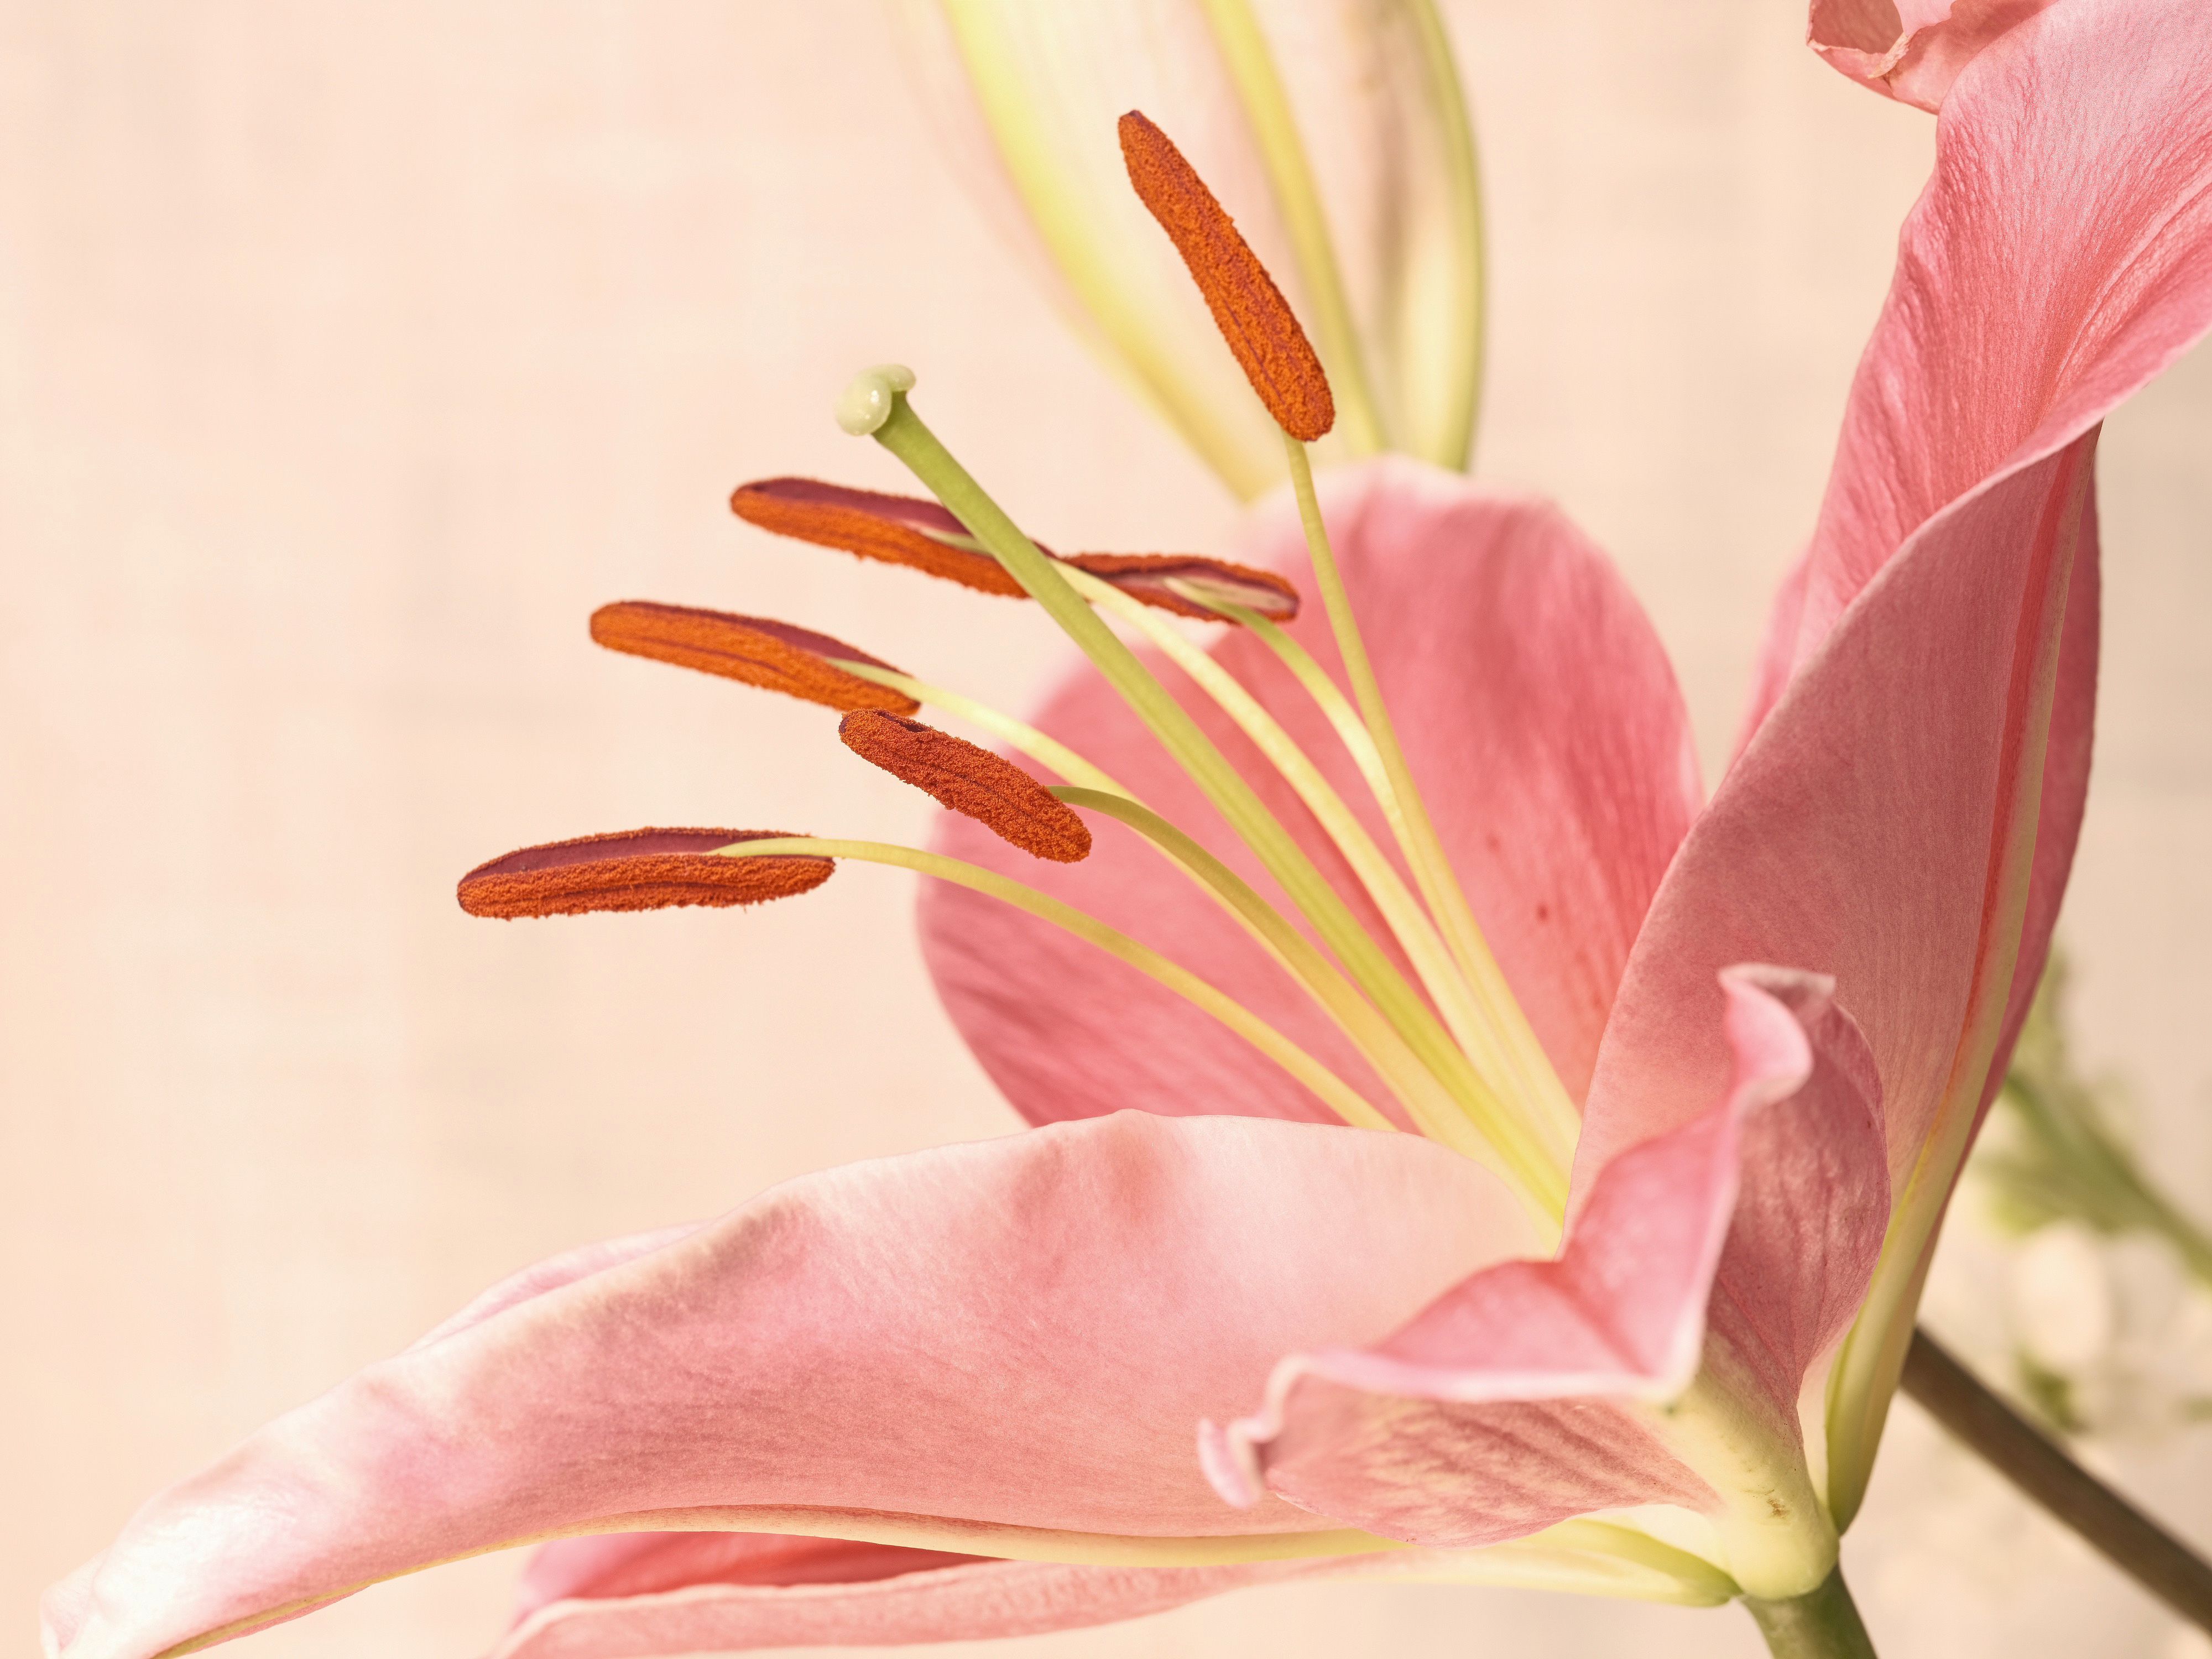 Lilies and assorted floral macro photography in Fort Worth Texas